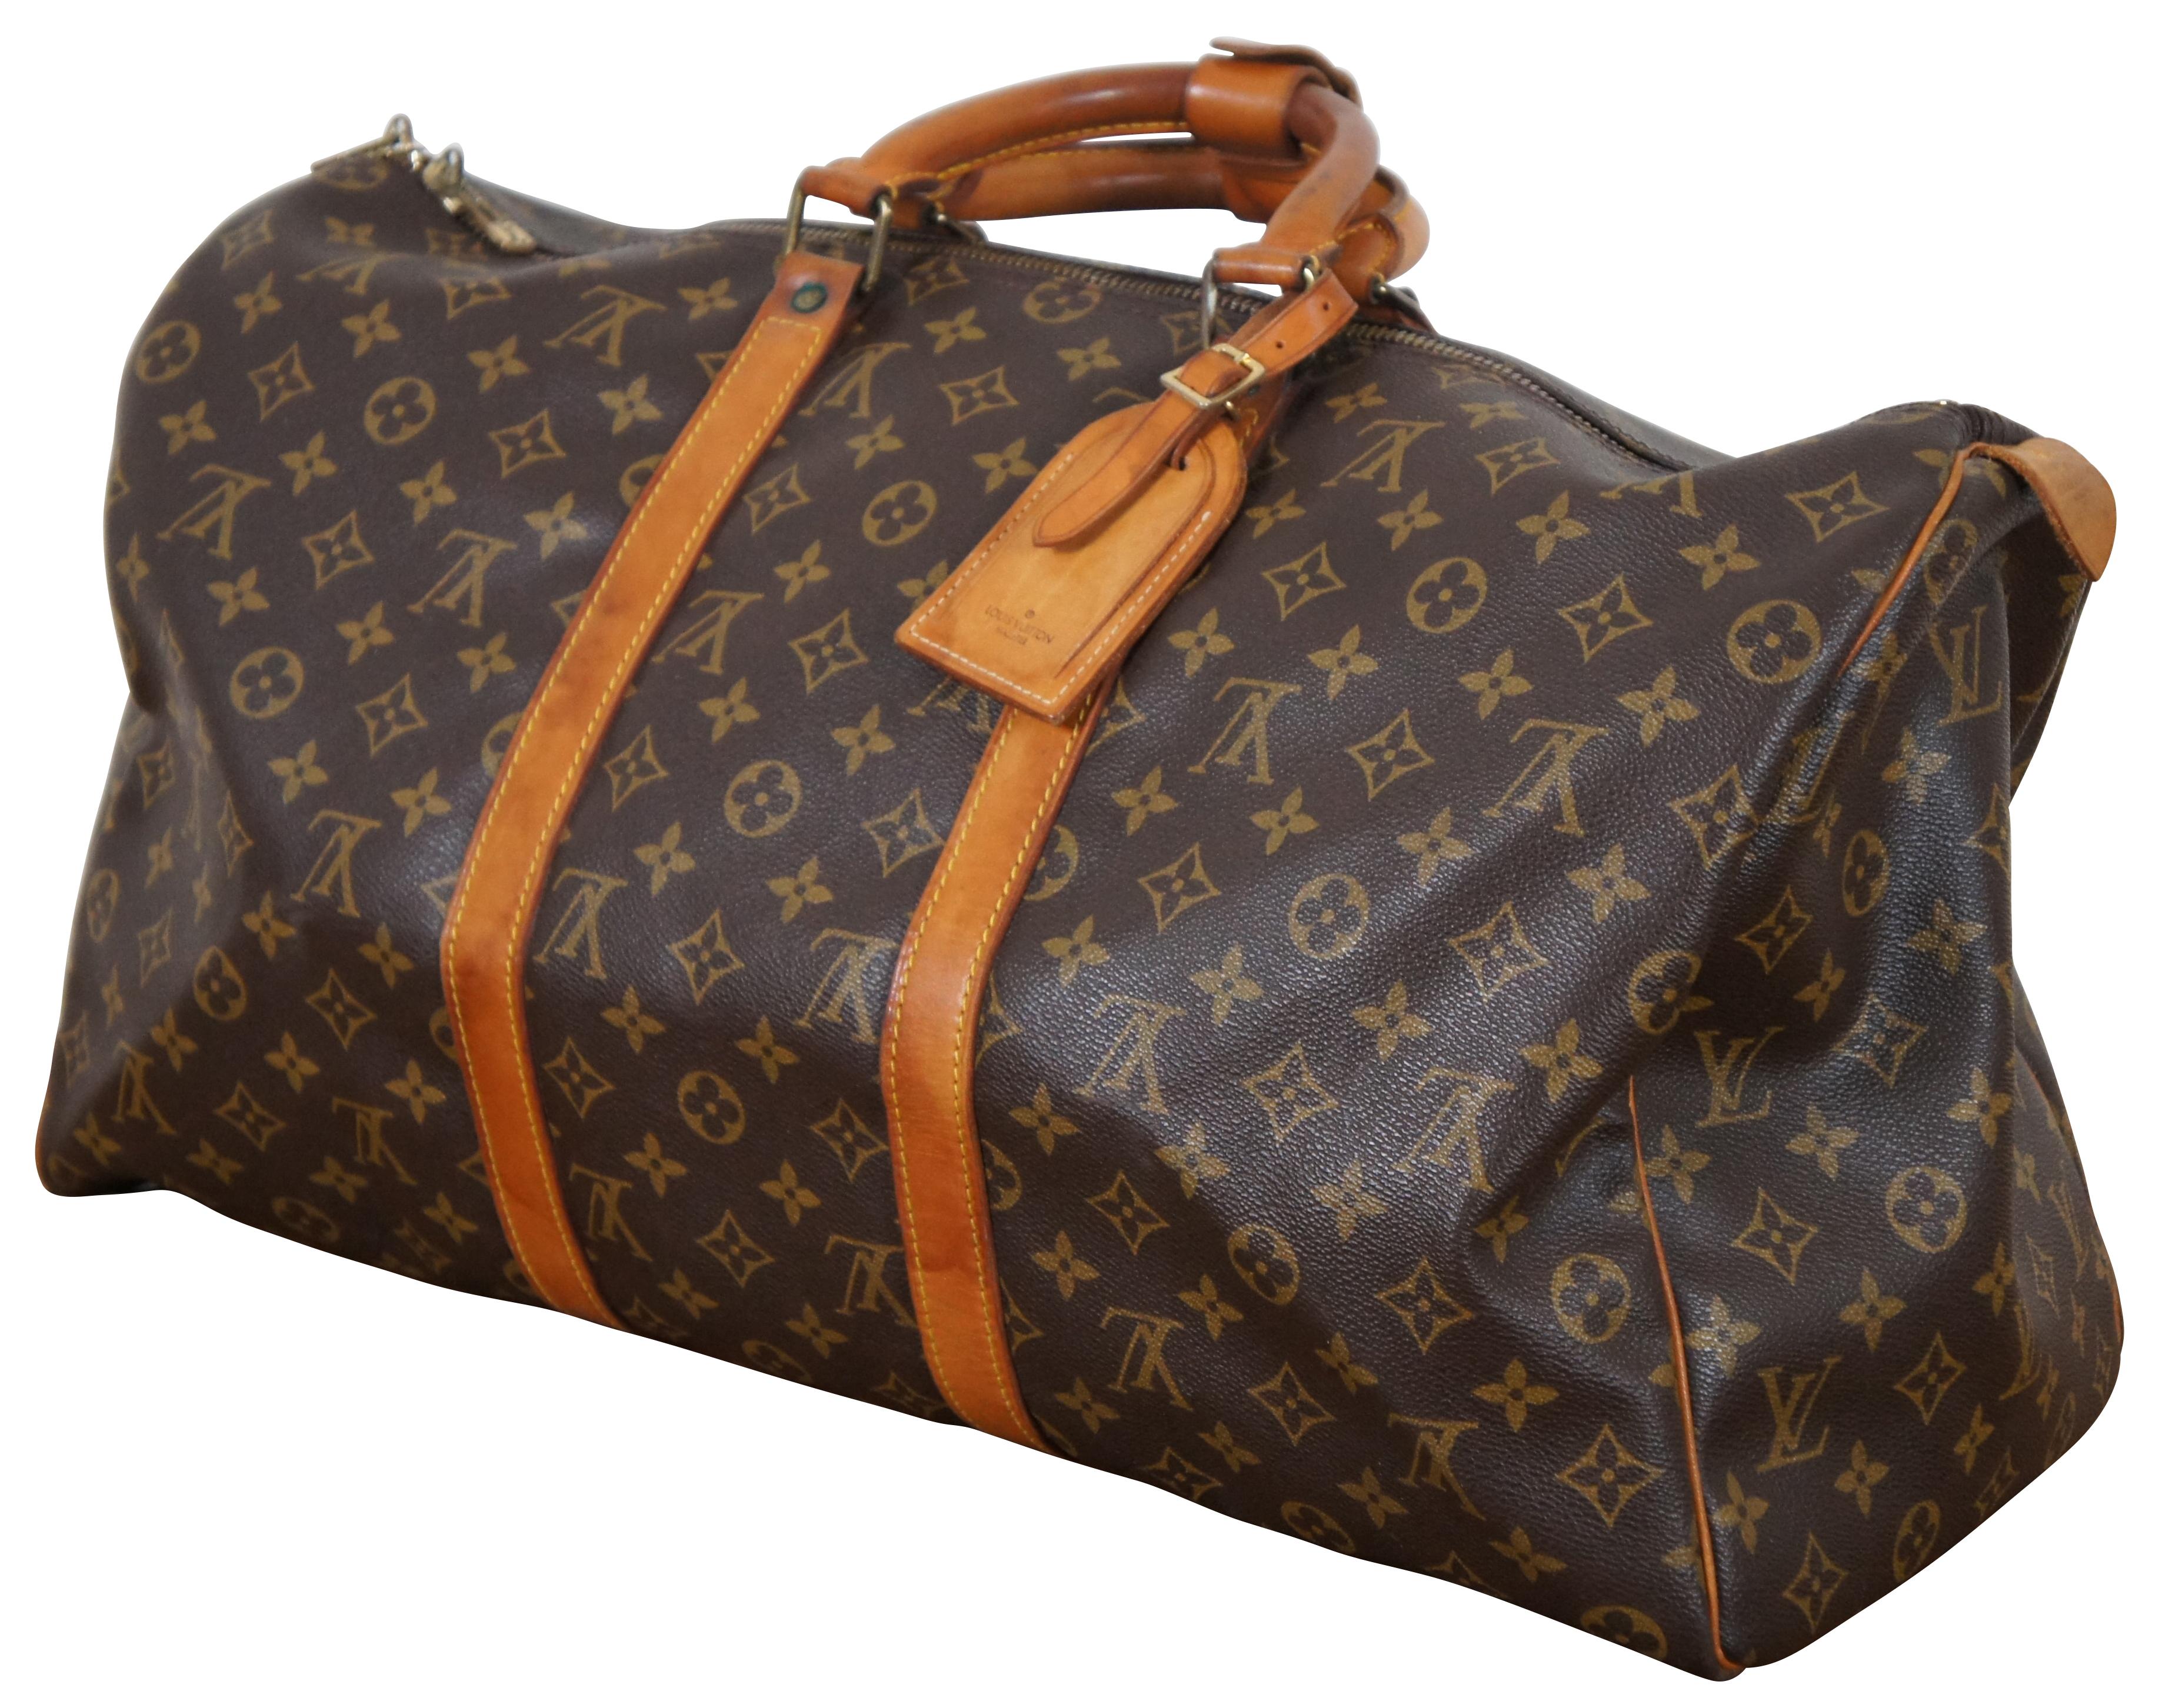 1980s Vintage Louis Vuitton Keepall Bandouliere 45 Boston duffle bag crafted from brown monogram canvas with leather straps and gold tone brass hardware. Includes luggage lock and two keys. Leather tabs marked FC892 Malletier.  Manufactured in